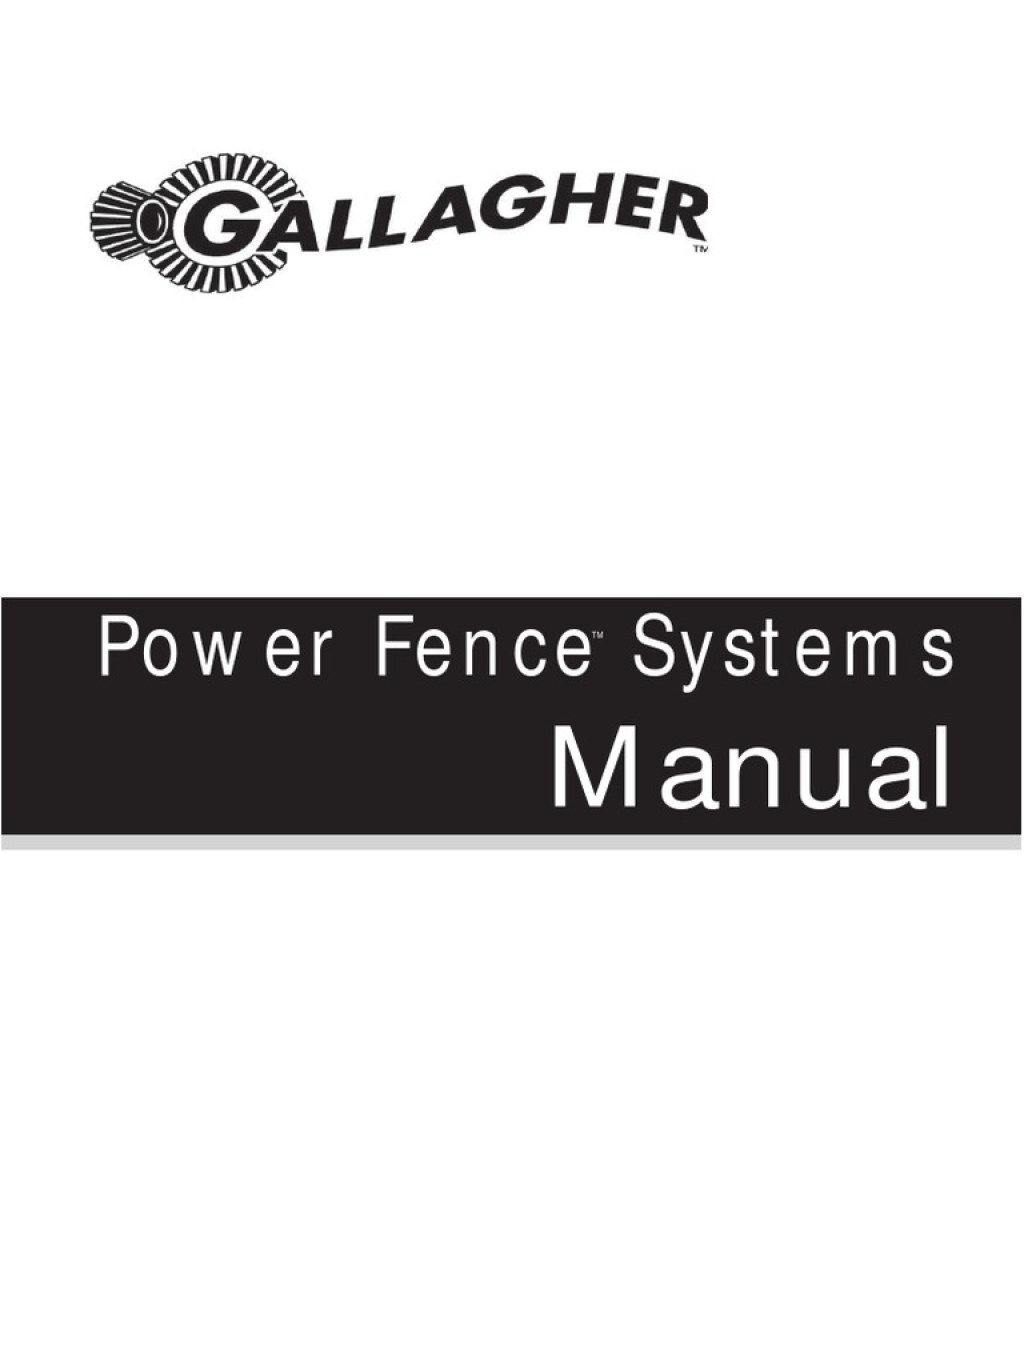 Picture of: Electric Fence Manual  PDF  Battery (Electricity)  Energy Storage